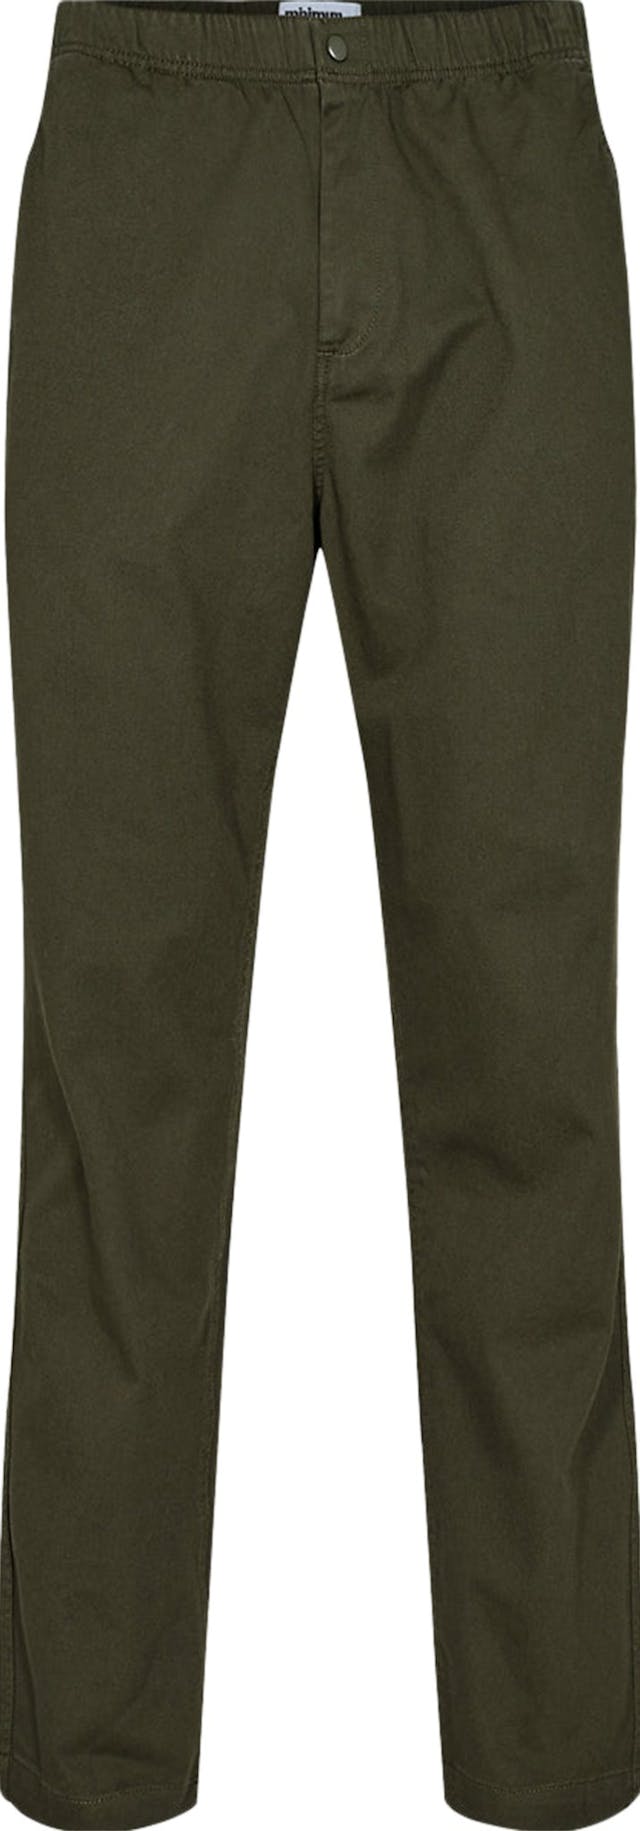 Product image for Zace 9971 Chino Pants - Men's